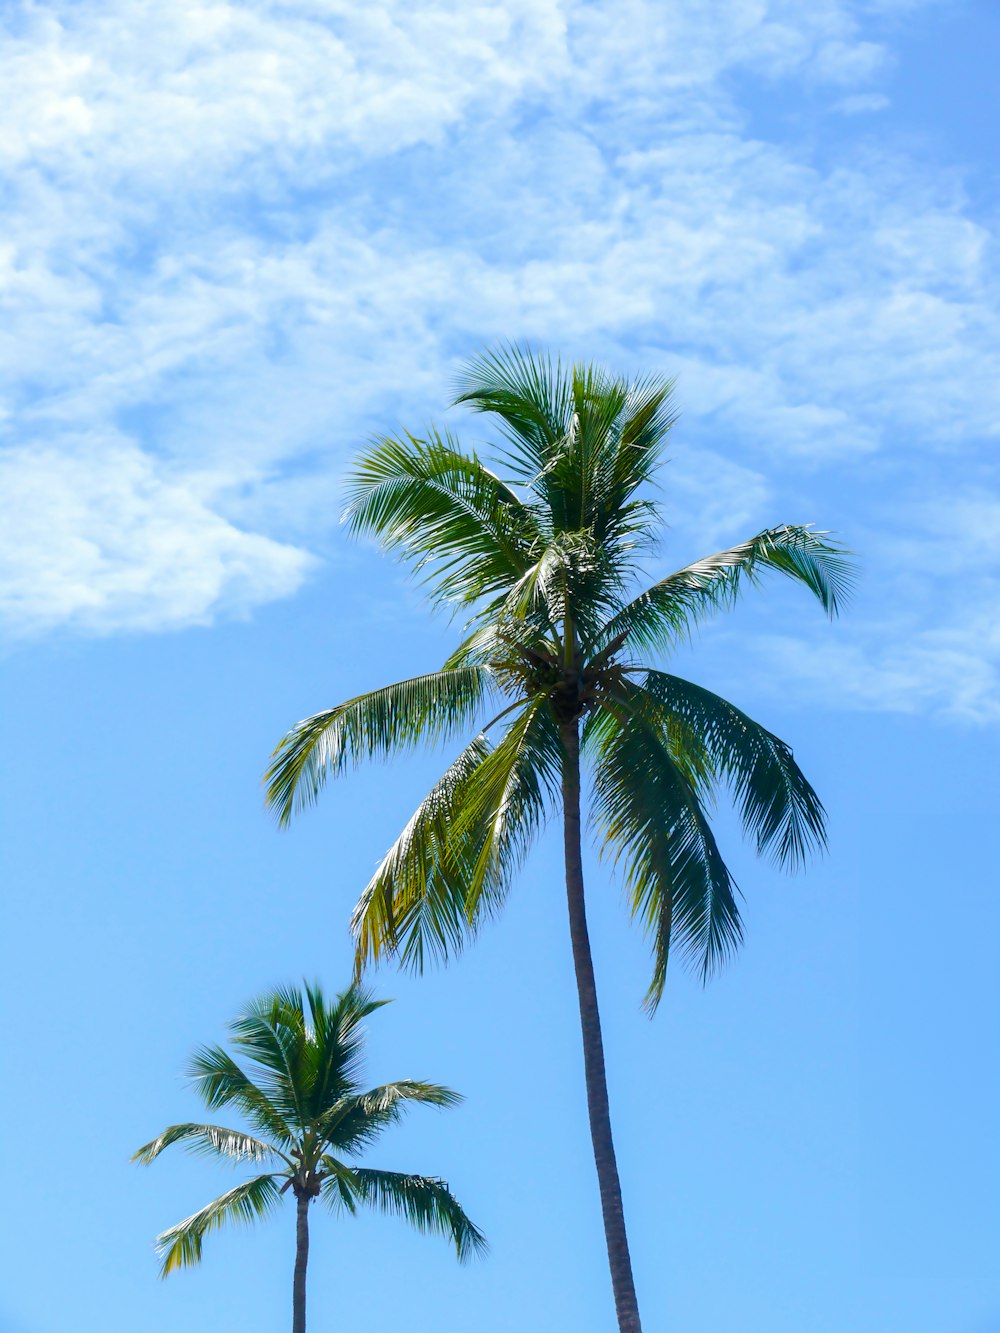 two palm trees against a blue sky with clouds